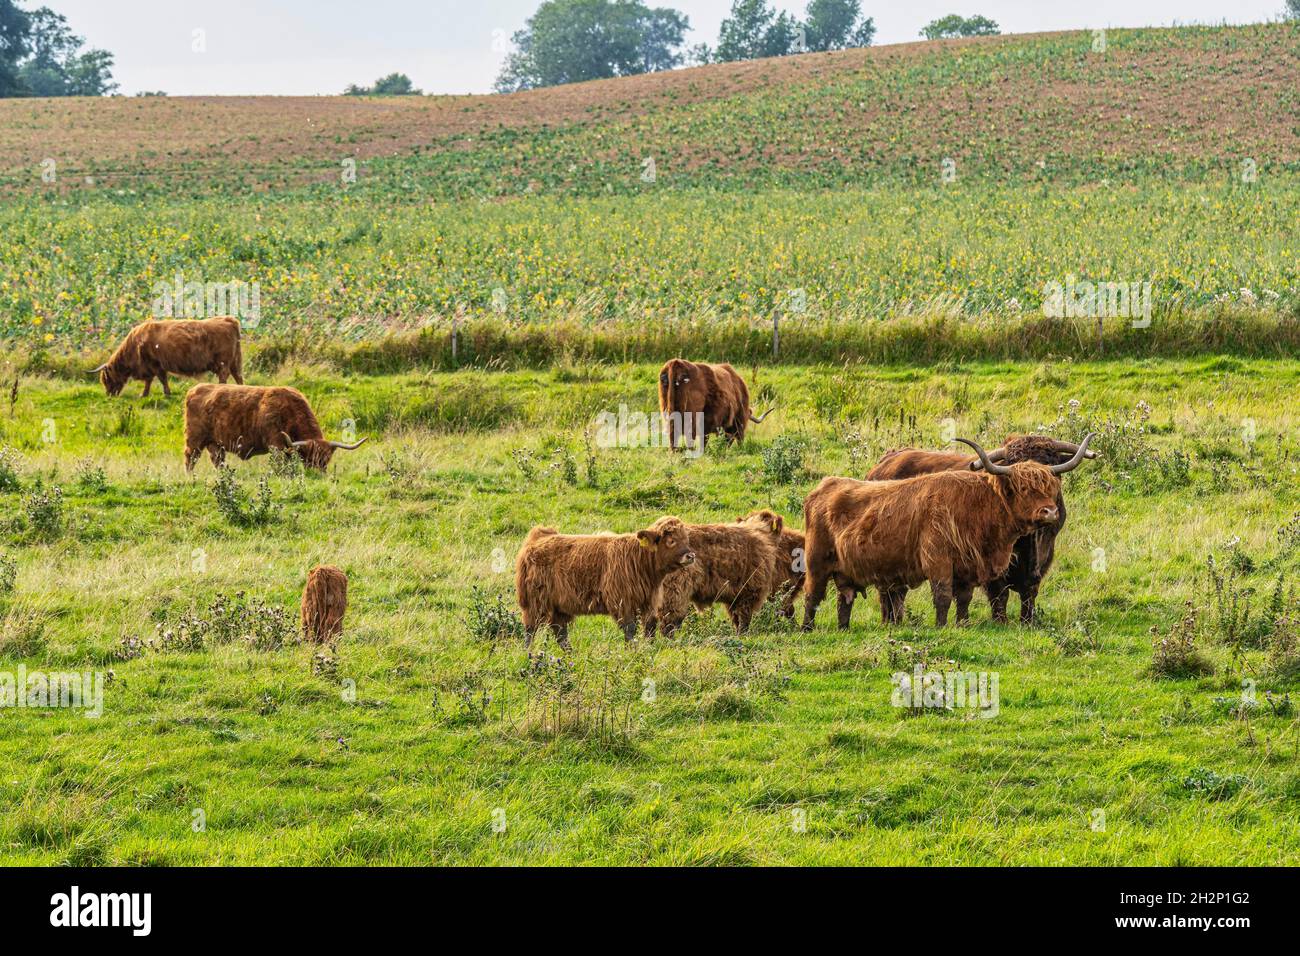 Herd of Highlander cows, a breed of cattle originally from Scotland, grazing. Denmark, Europe Stock Photo